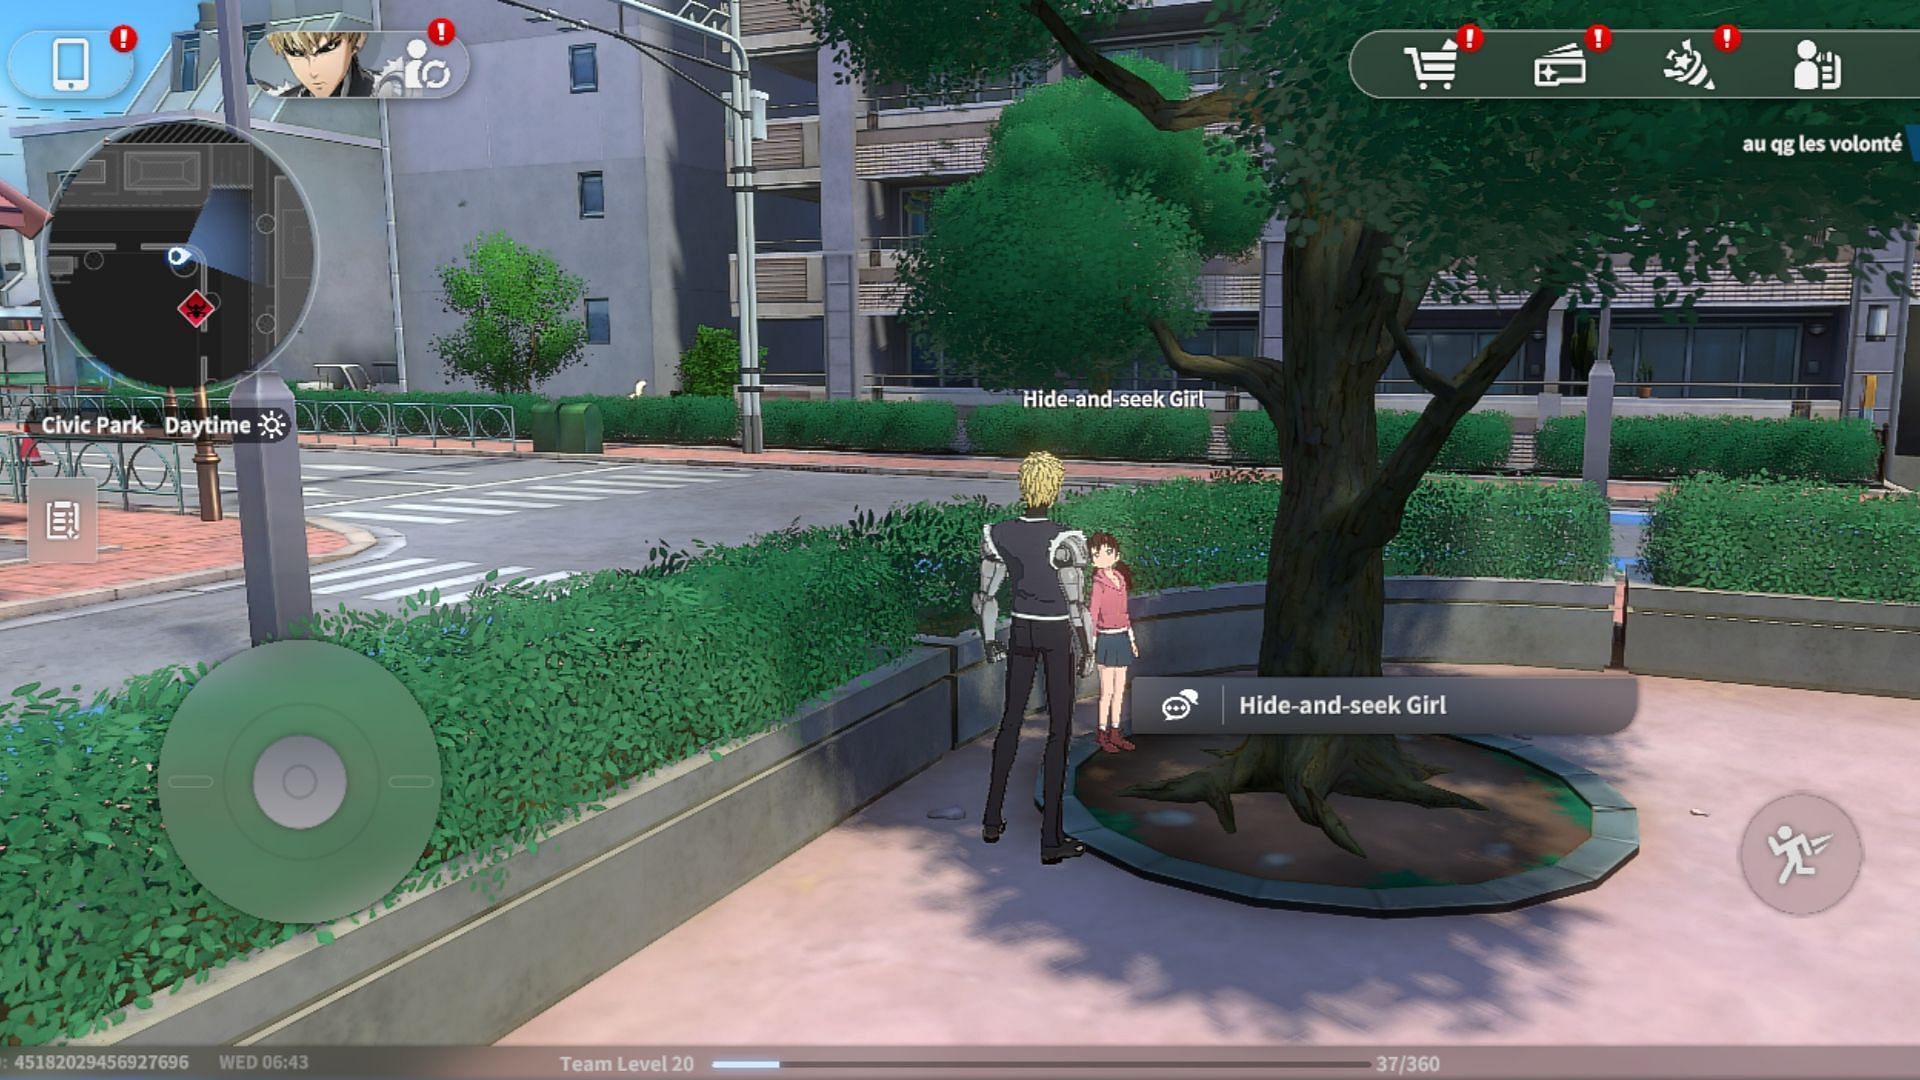 A little girl hiding inside the park will give you the sixth Fresh Server in City A (Image via Perfect World)